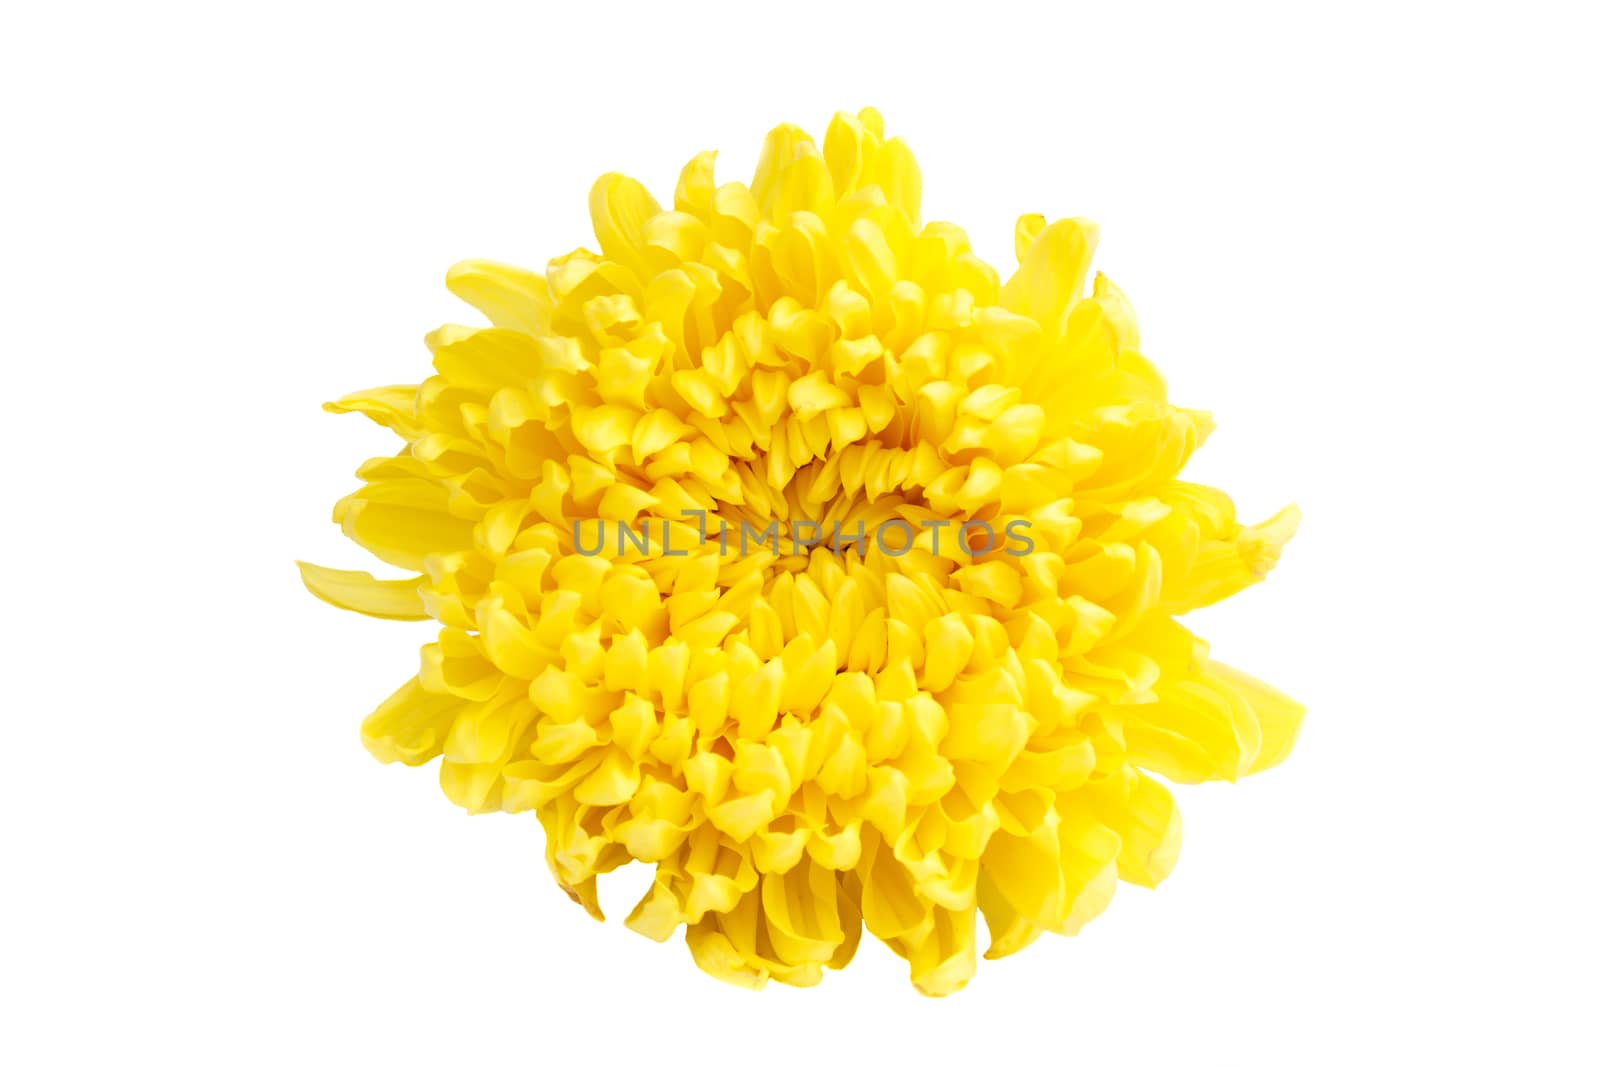 yellow color Chrysanthemum on white background (isolated)